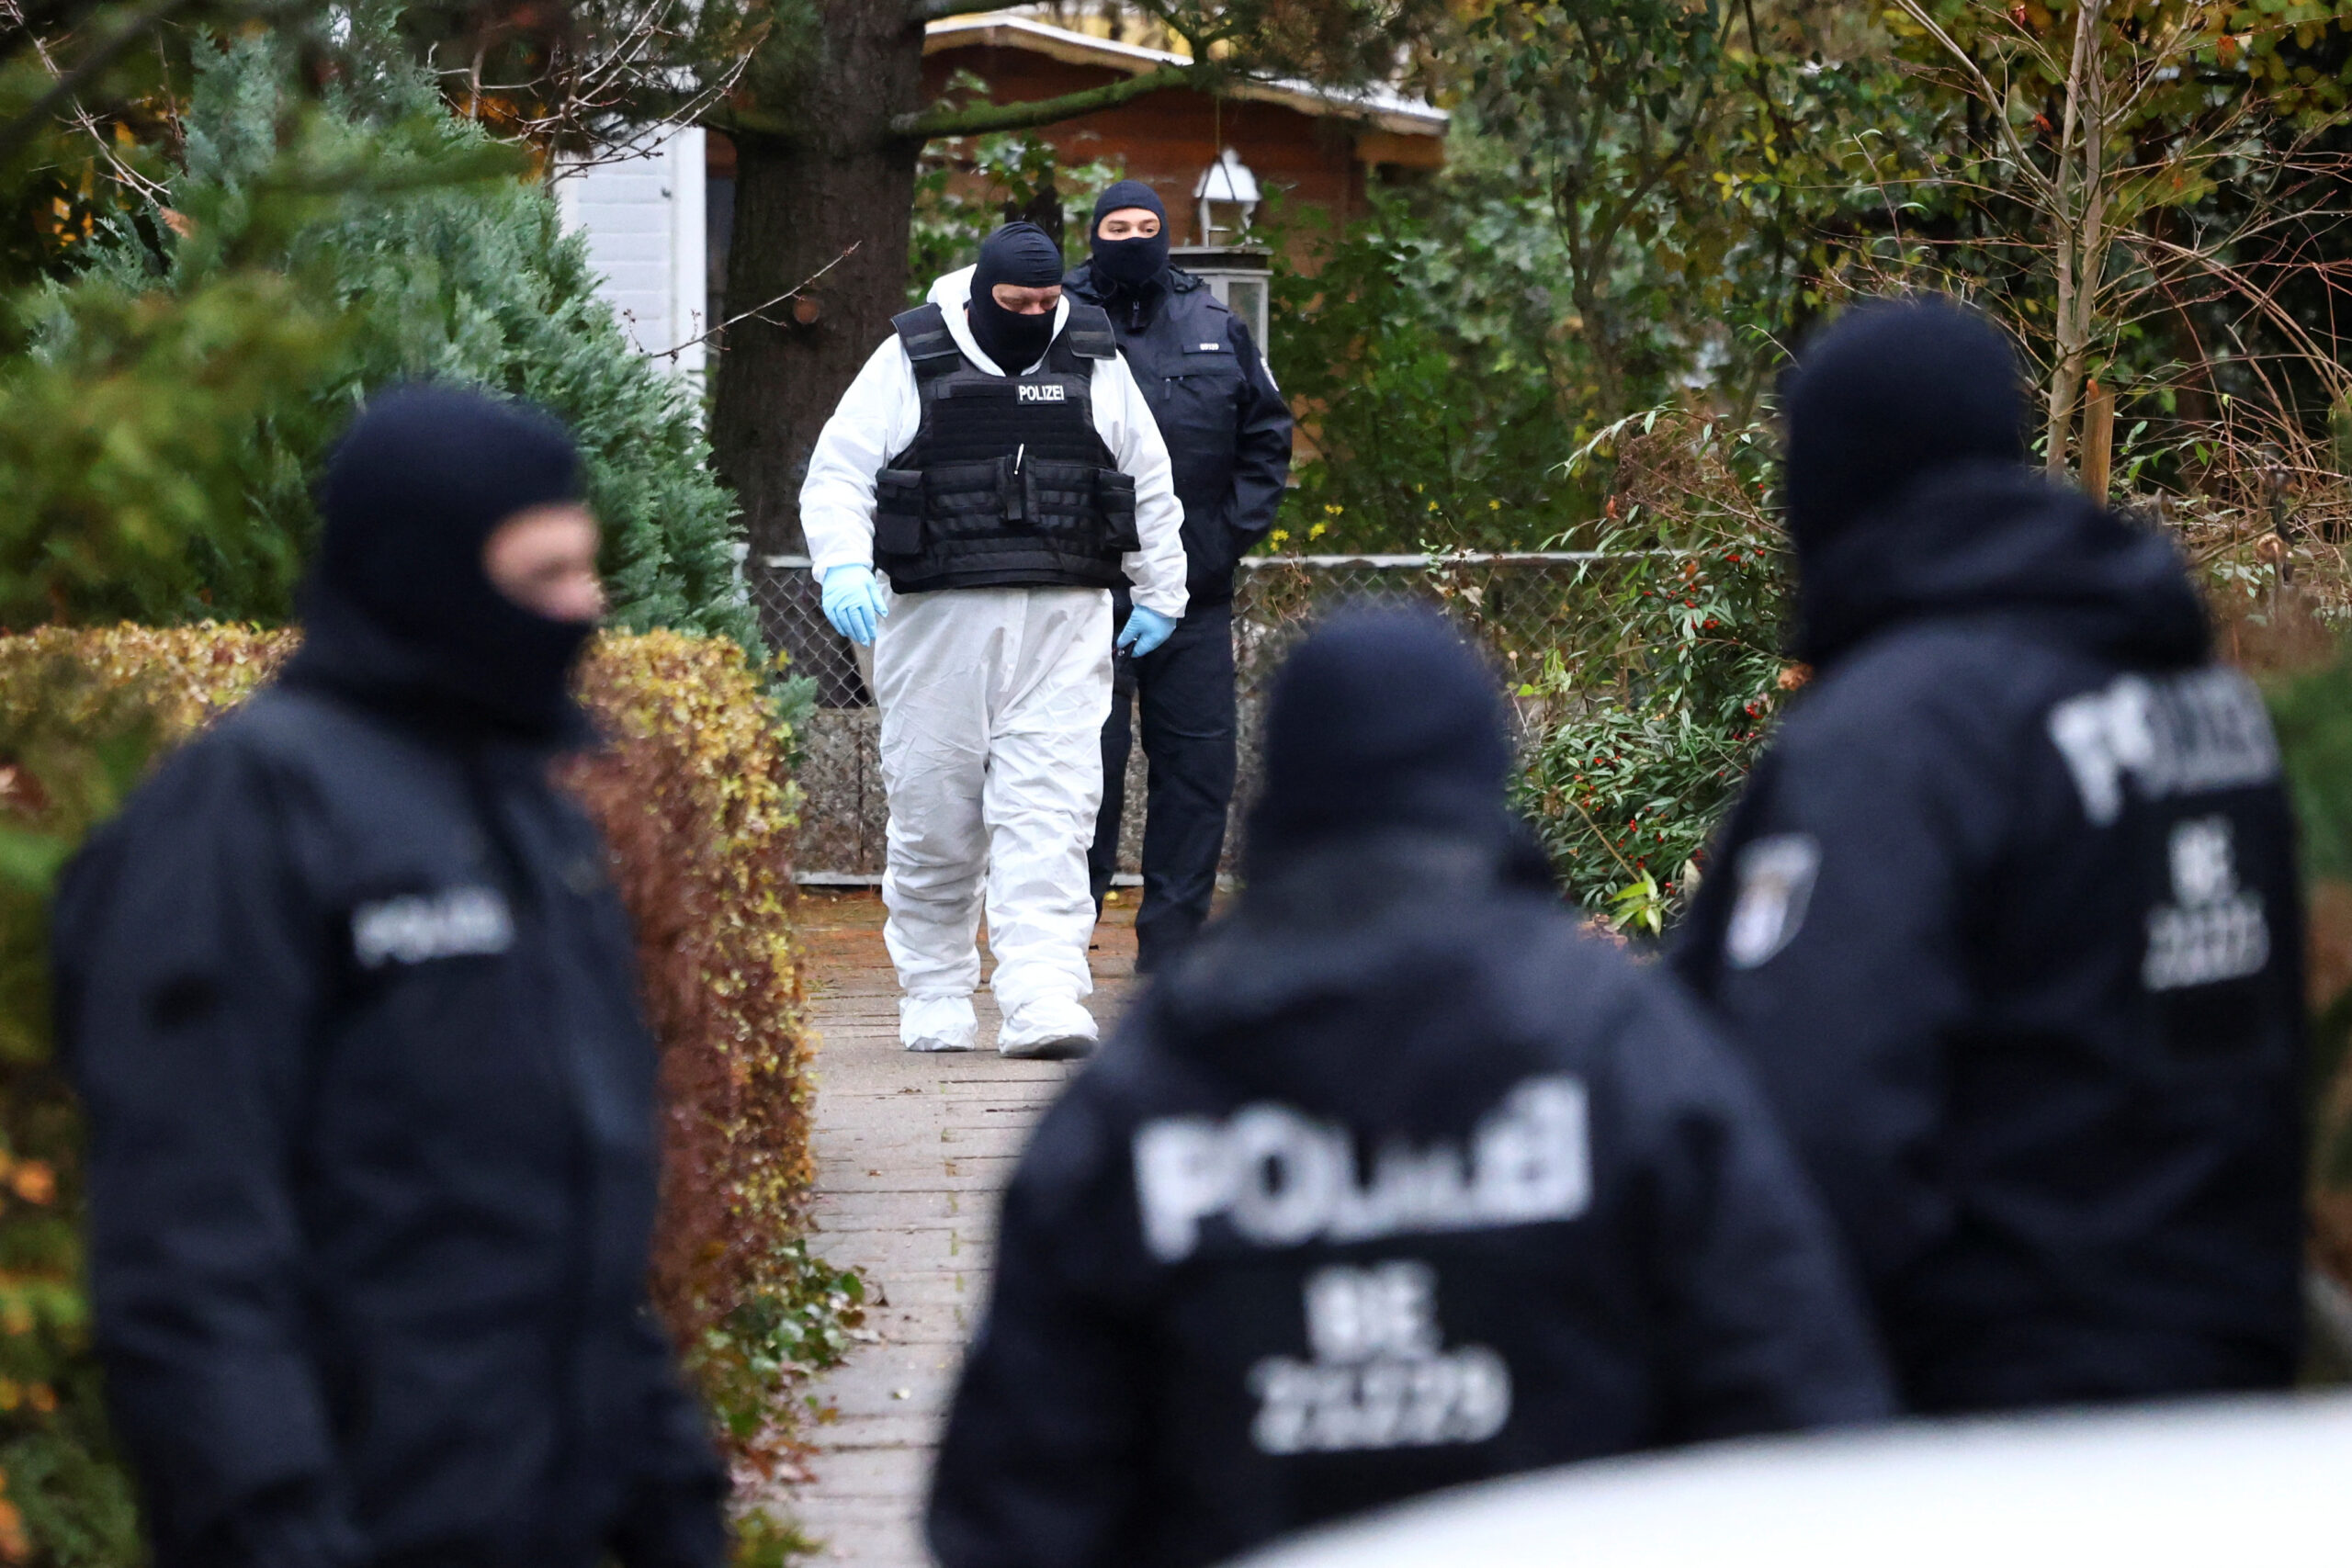 Suspected members and supporters of a far-right group were detained during raids, in Berlin